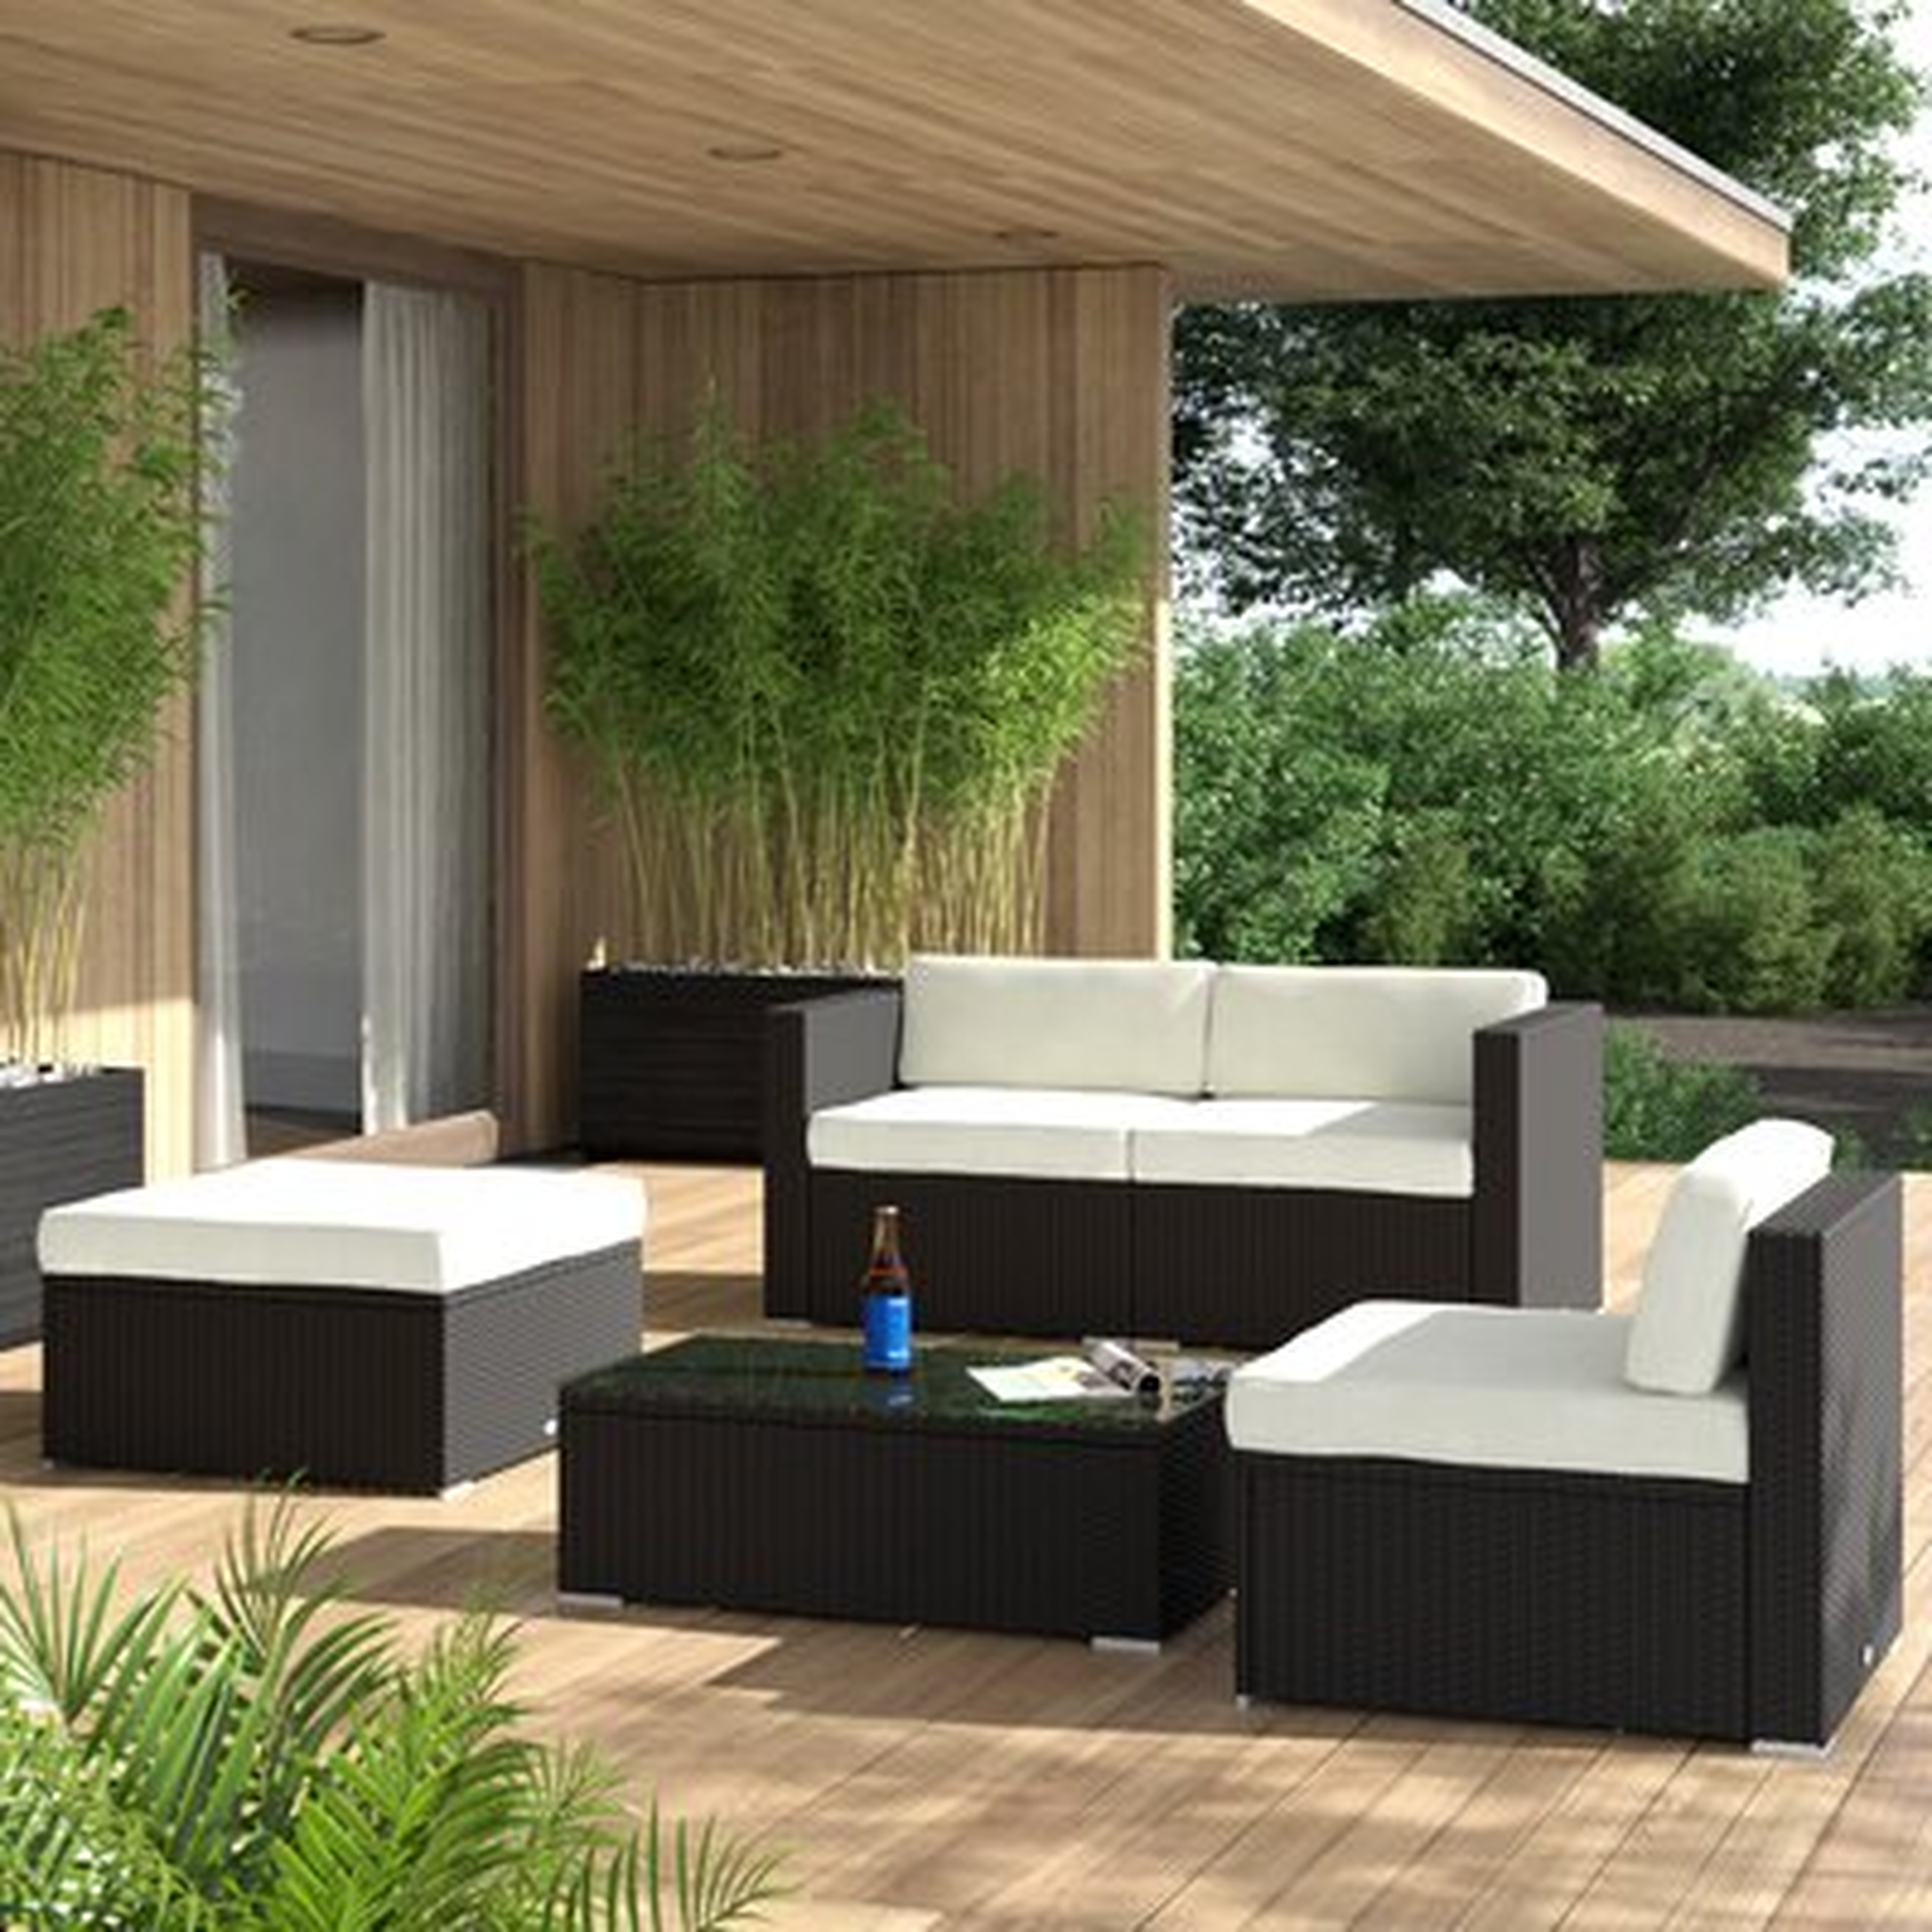 Hazen 5 Piece Rattan Sectional Seating Group with Cushions - AllModern